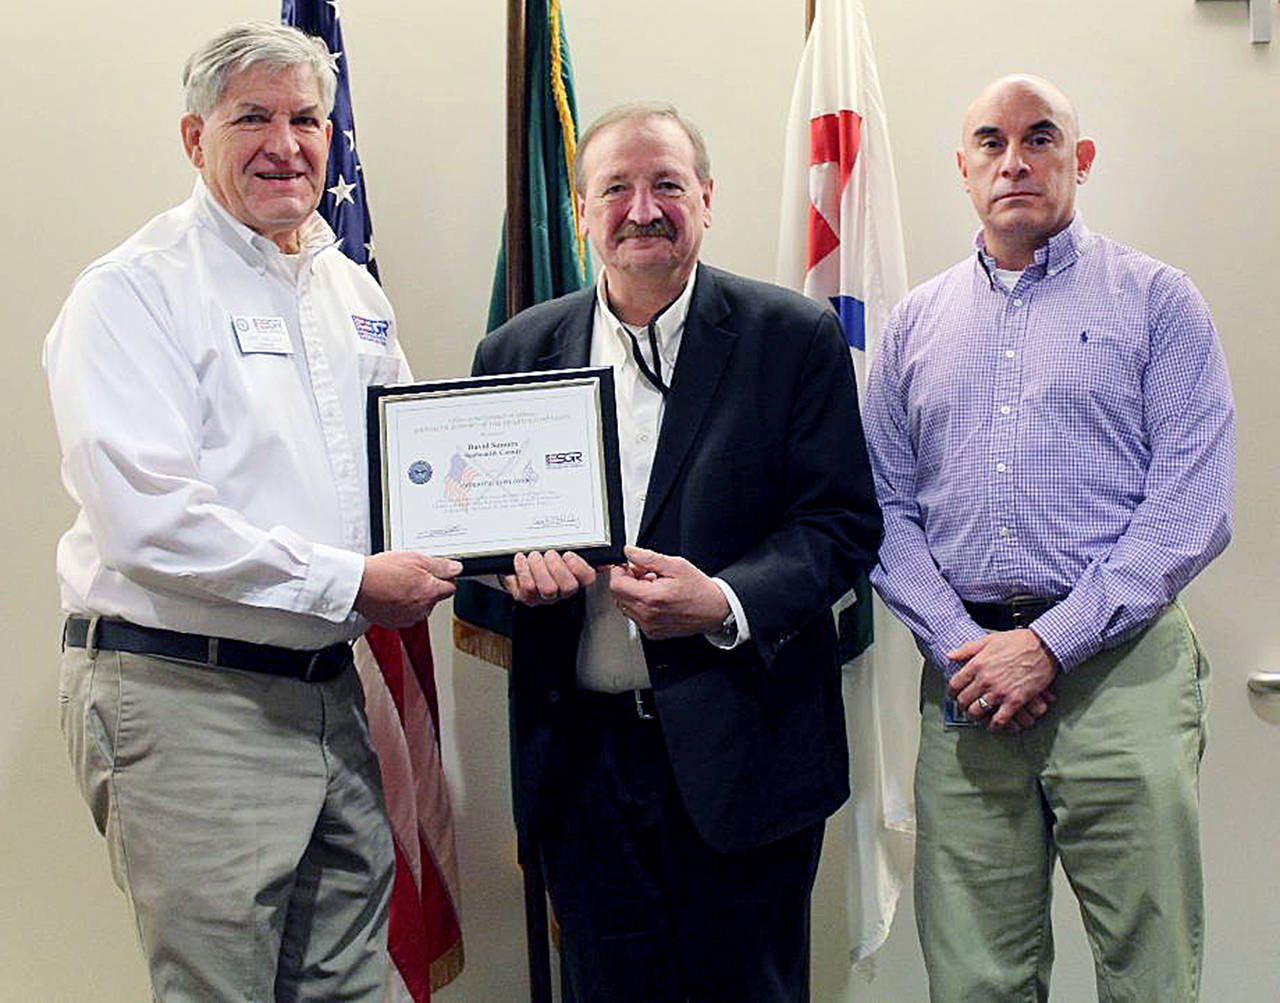 Snohomish County Executive David Somers was presented the ESGR Patriot Award at a recent county council meeting. The recognition was made by John Van Dalen (left), who is with the Washington Employer Support of the Guard Reserve. Somers was nominated by USAR CW2 David J. Lente (right), who works for the county and who serves with the 373rd E-MI BN Joint Base Lewis McCord.